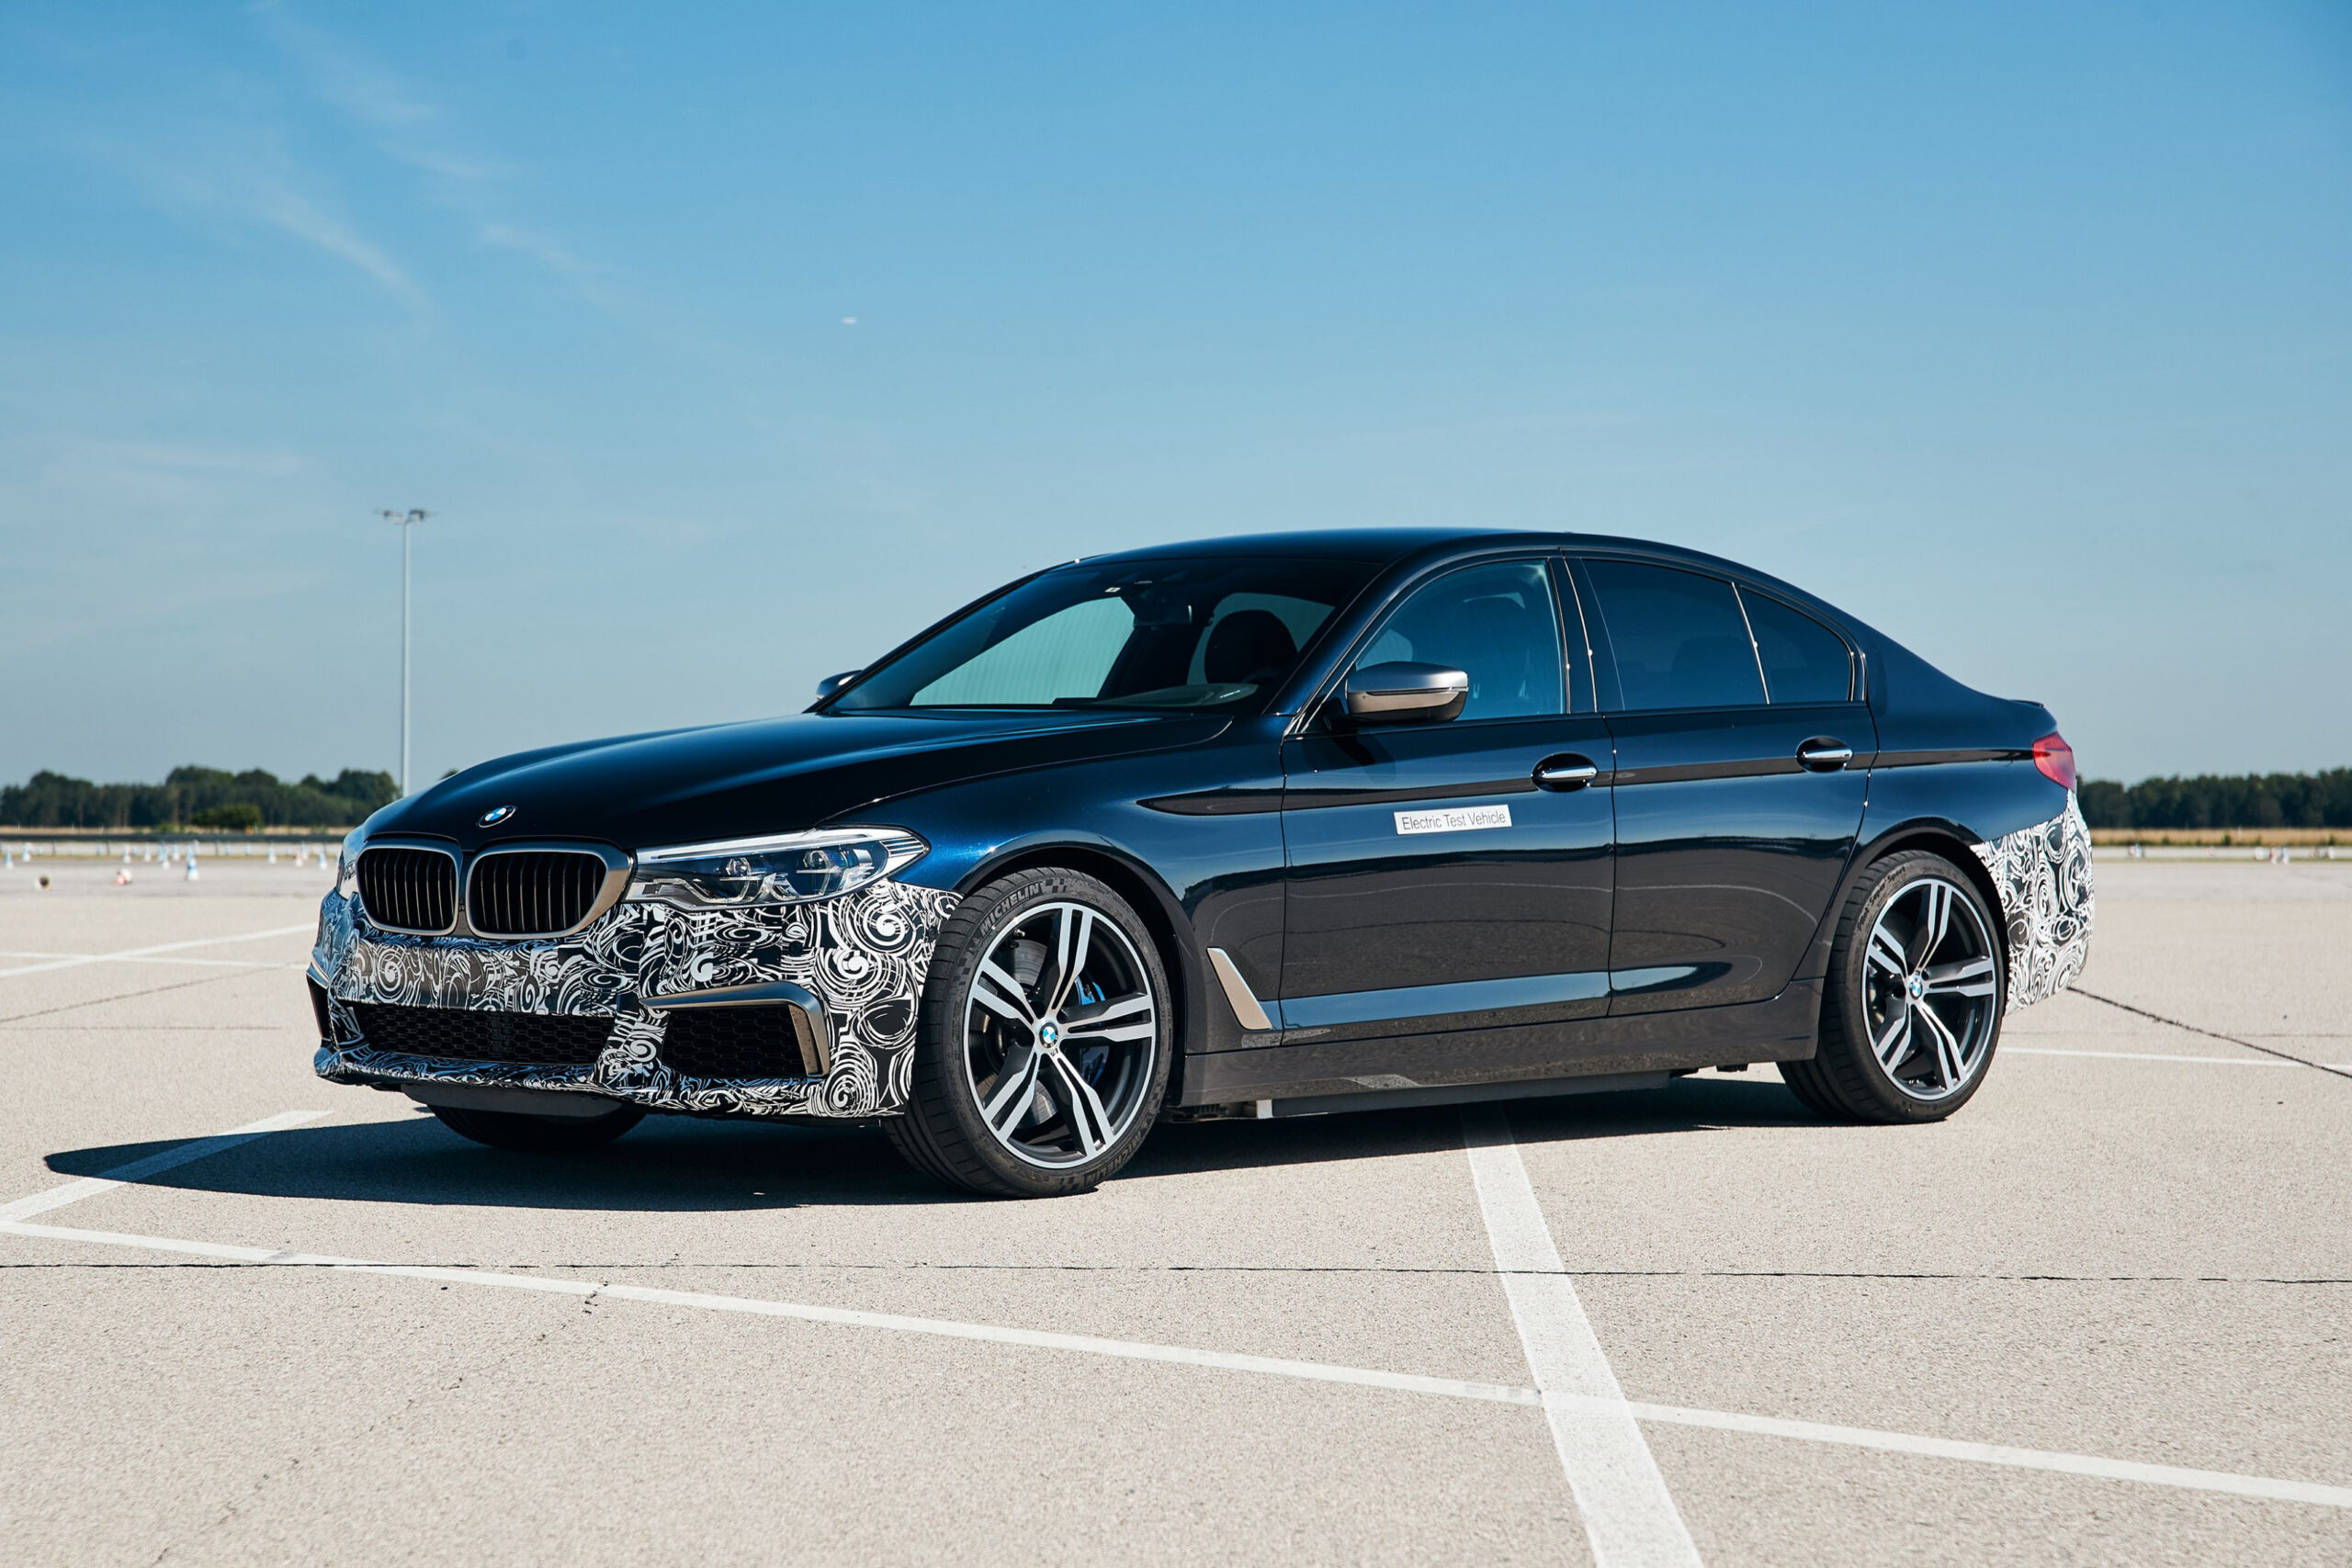 Bmw's Power Bev 5 Series Prototype Is Stupid Quick Details, Photos Bmw 5 Series Electric